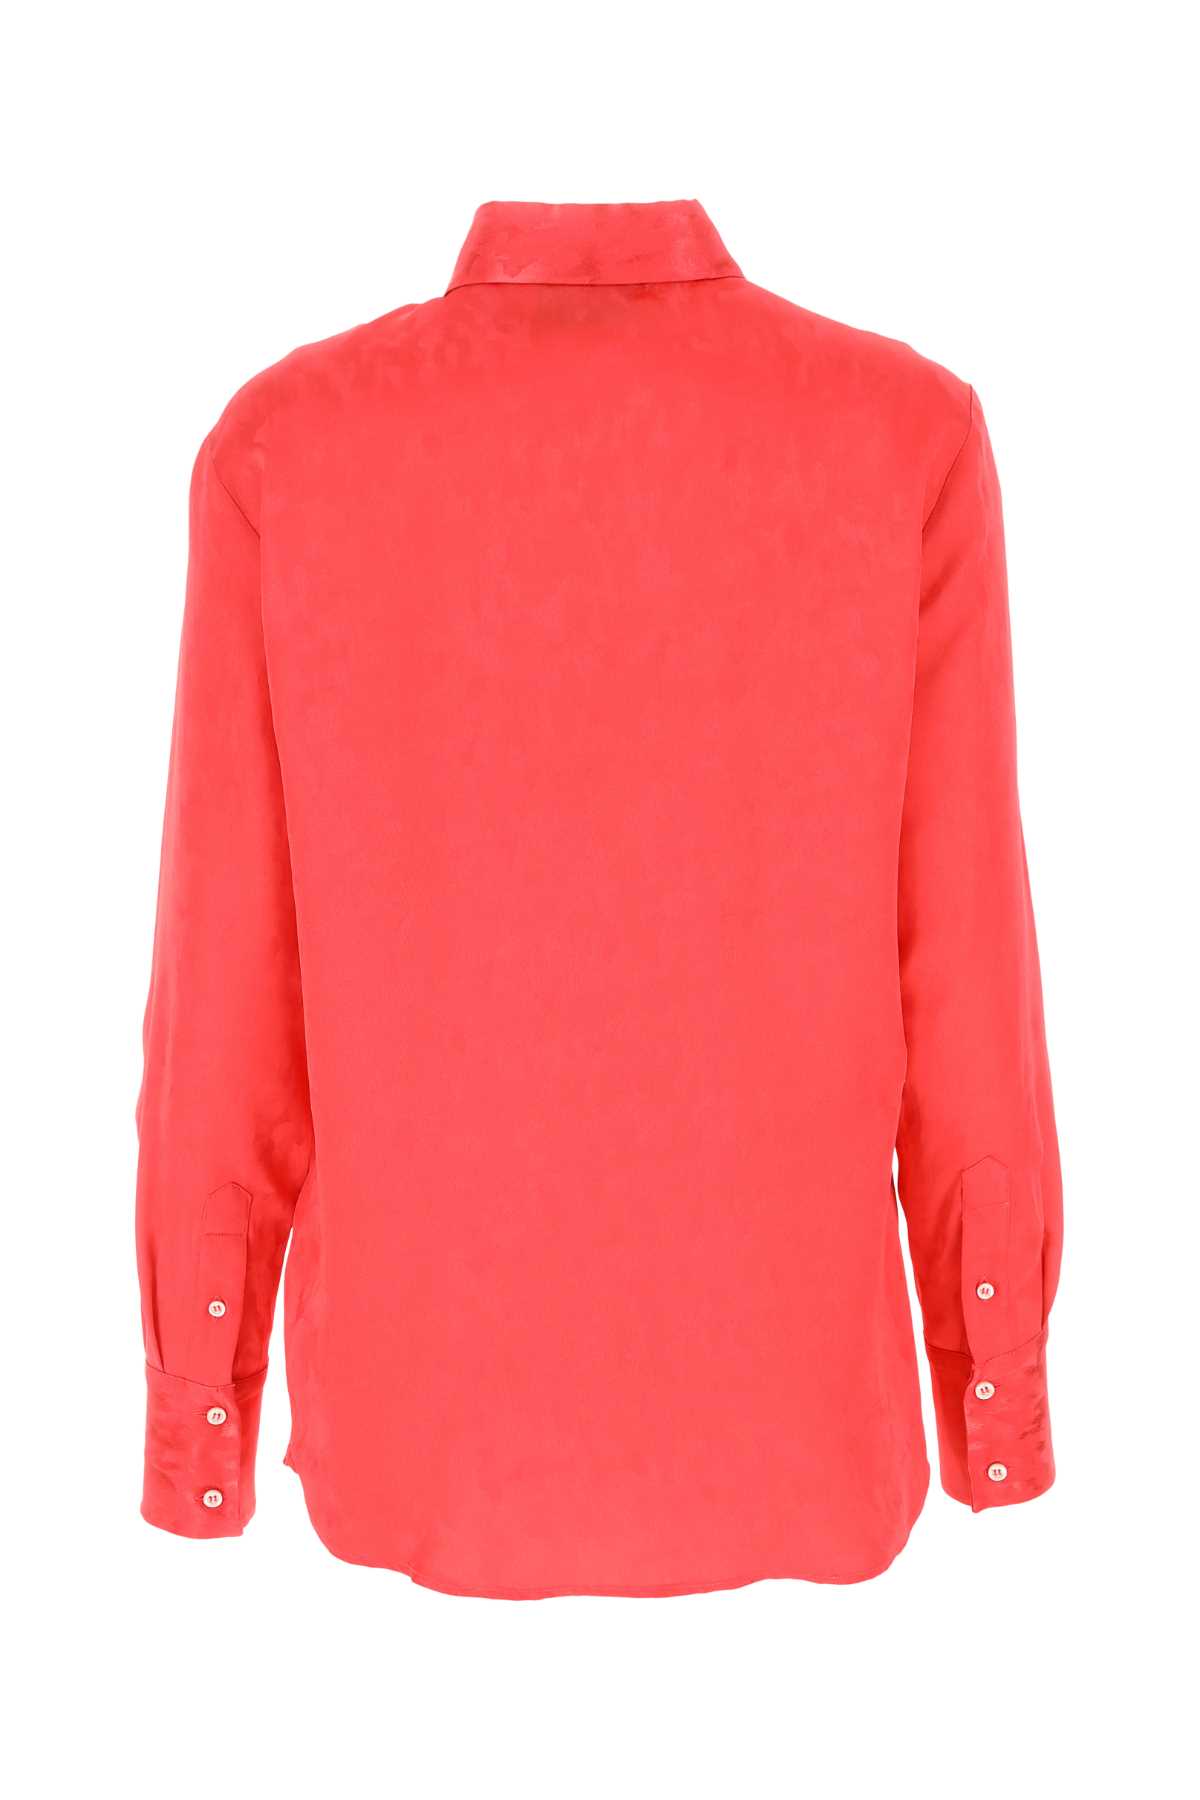 Msgm Coral Satin Shirt In 13